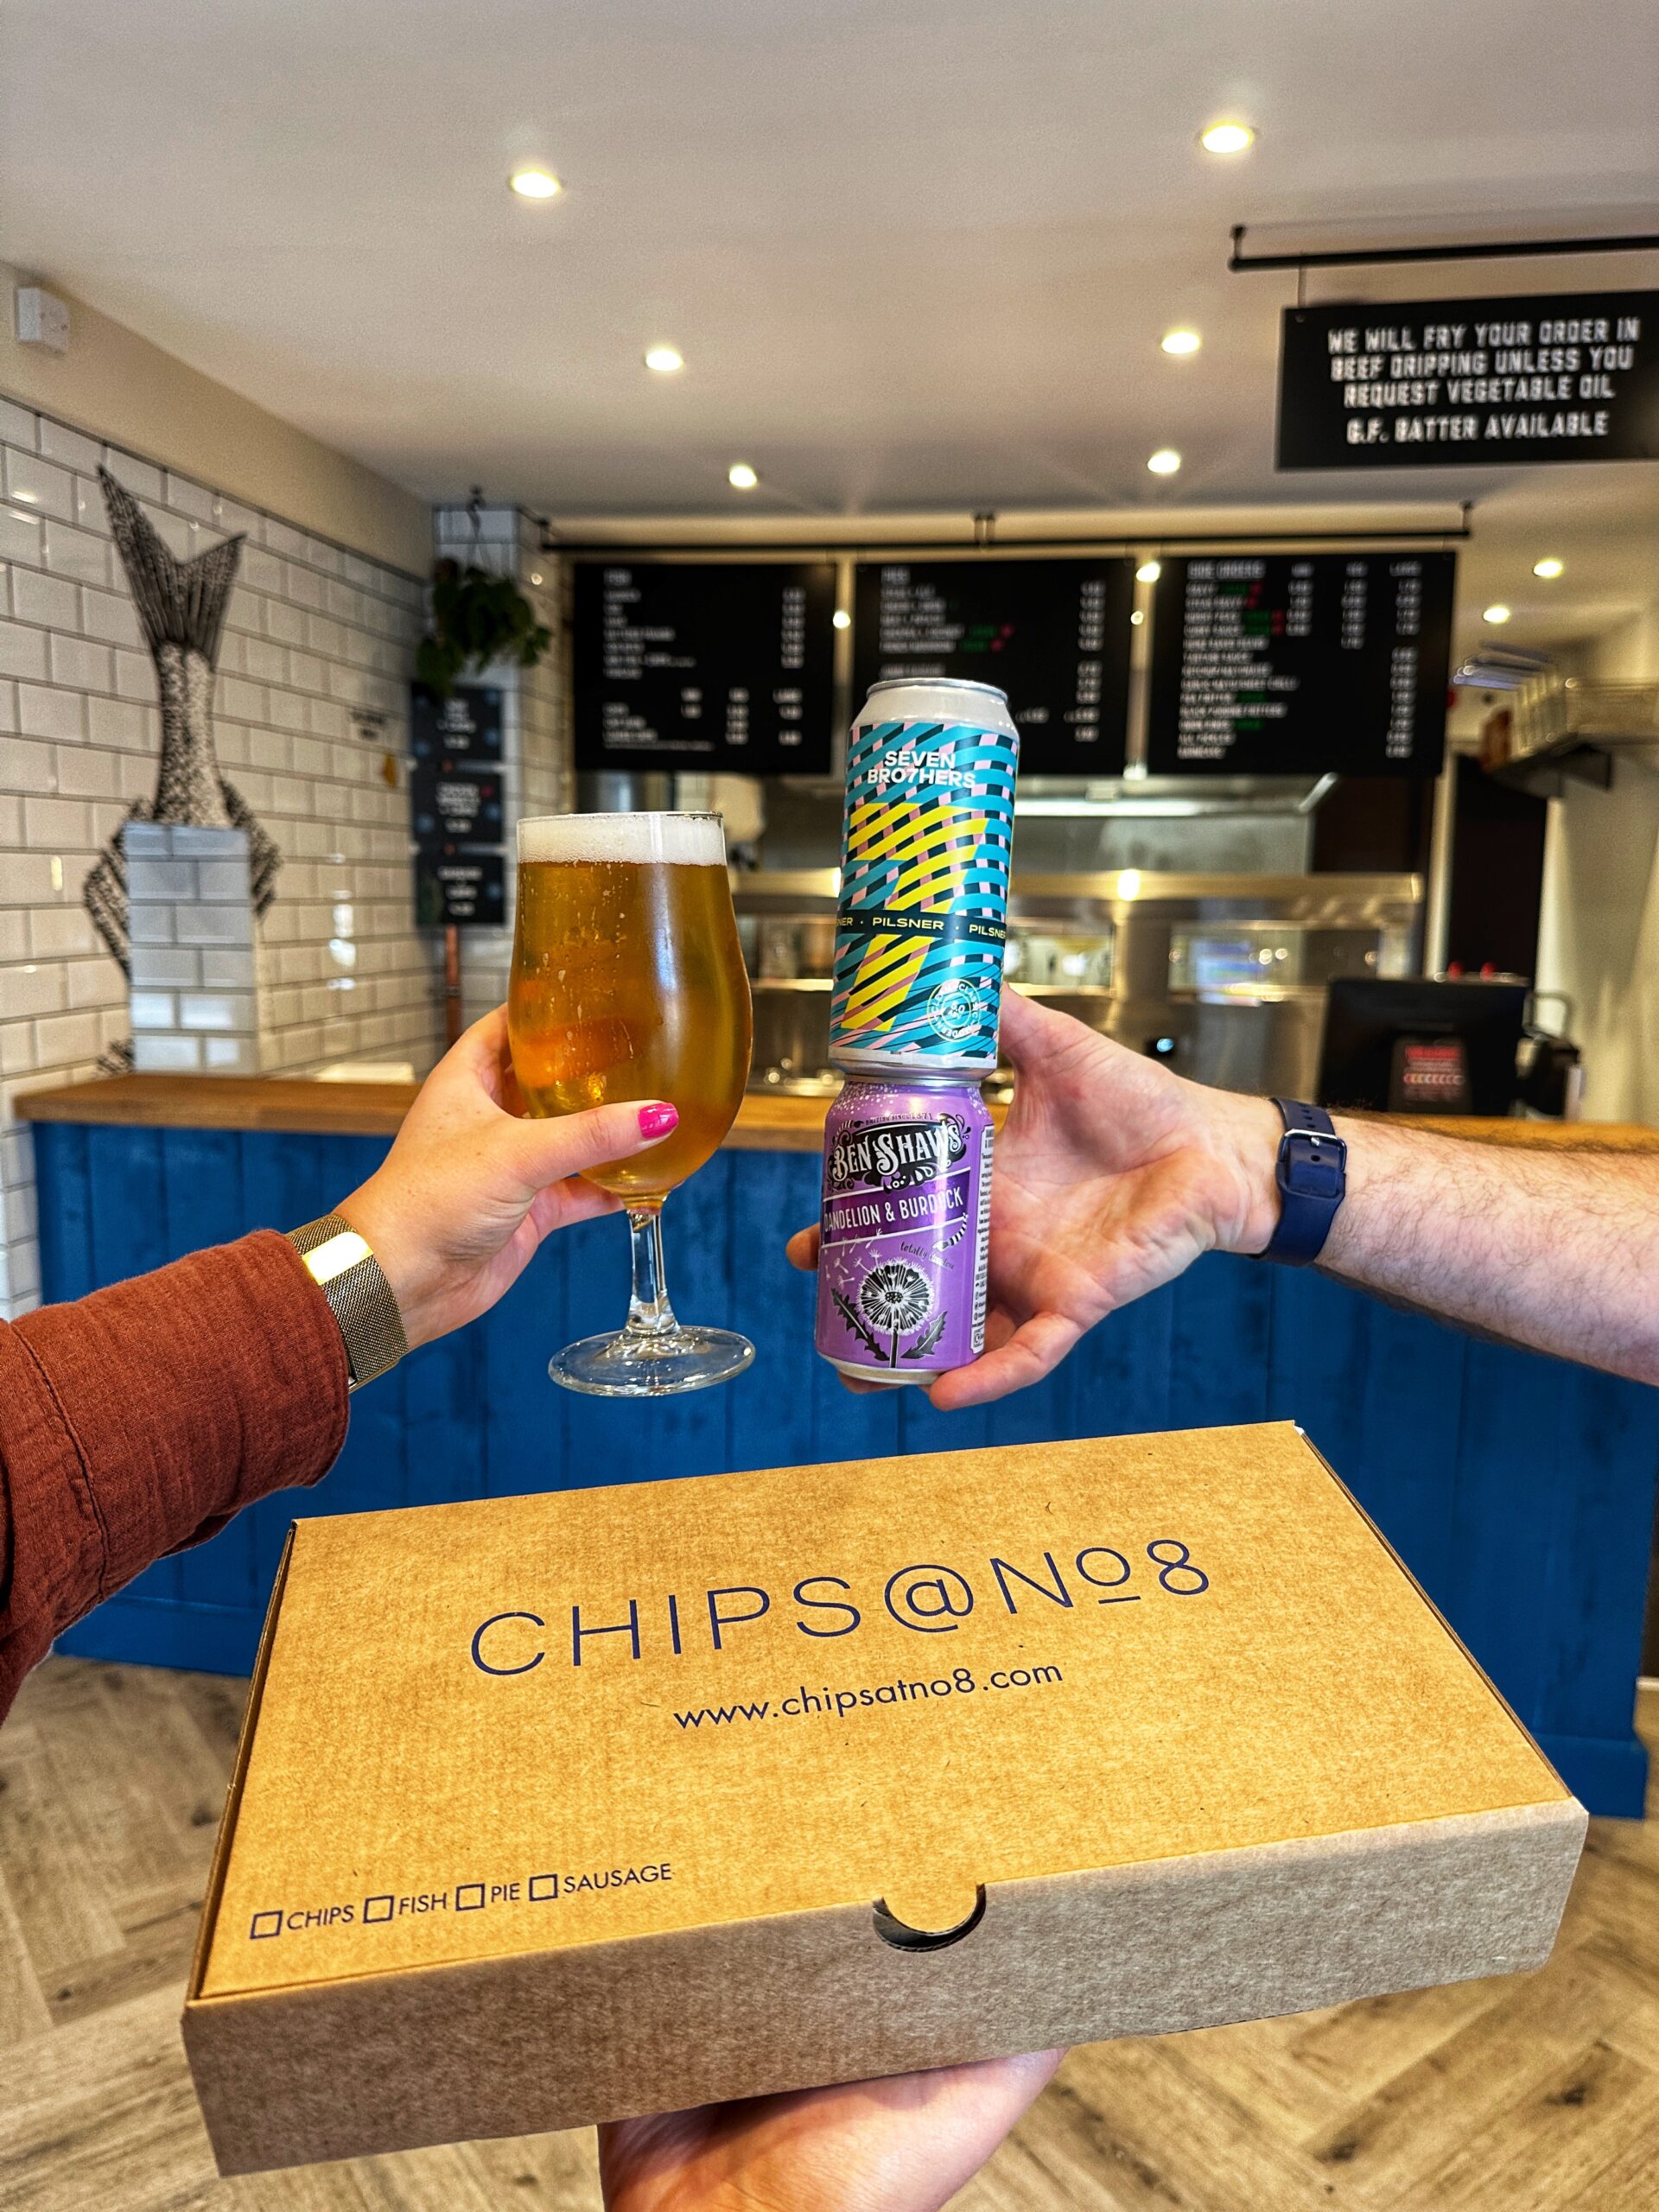 You can now get cans of local beer to take away with your chippy tea